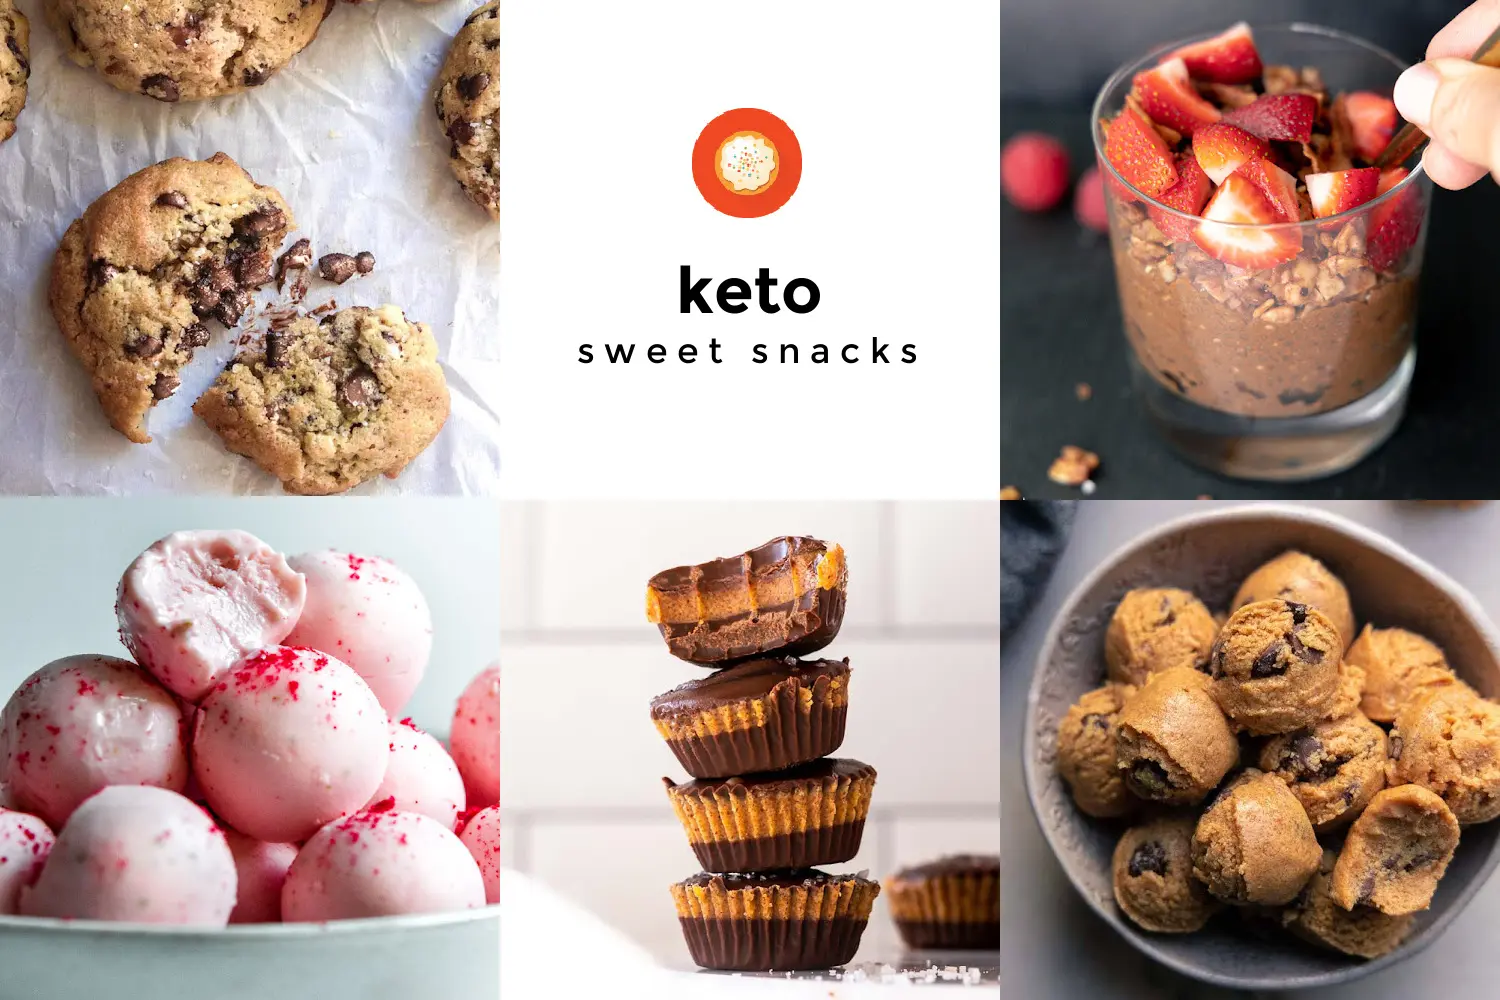 Serving up a variety of low carb snacks with copious amounts of flavor and texture will embellish your senses and enhance your meal plan. #lowcarbsnacks #ketosnacks